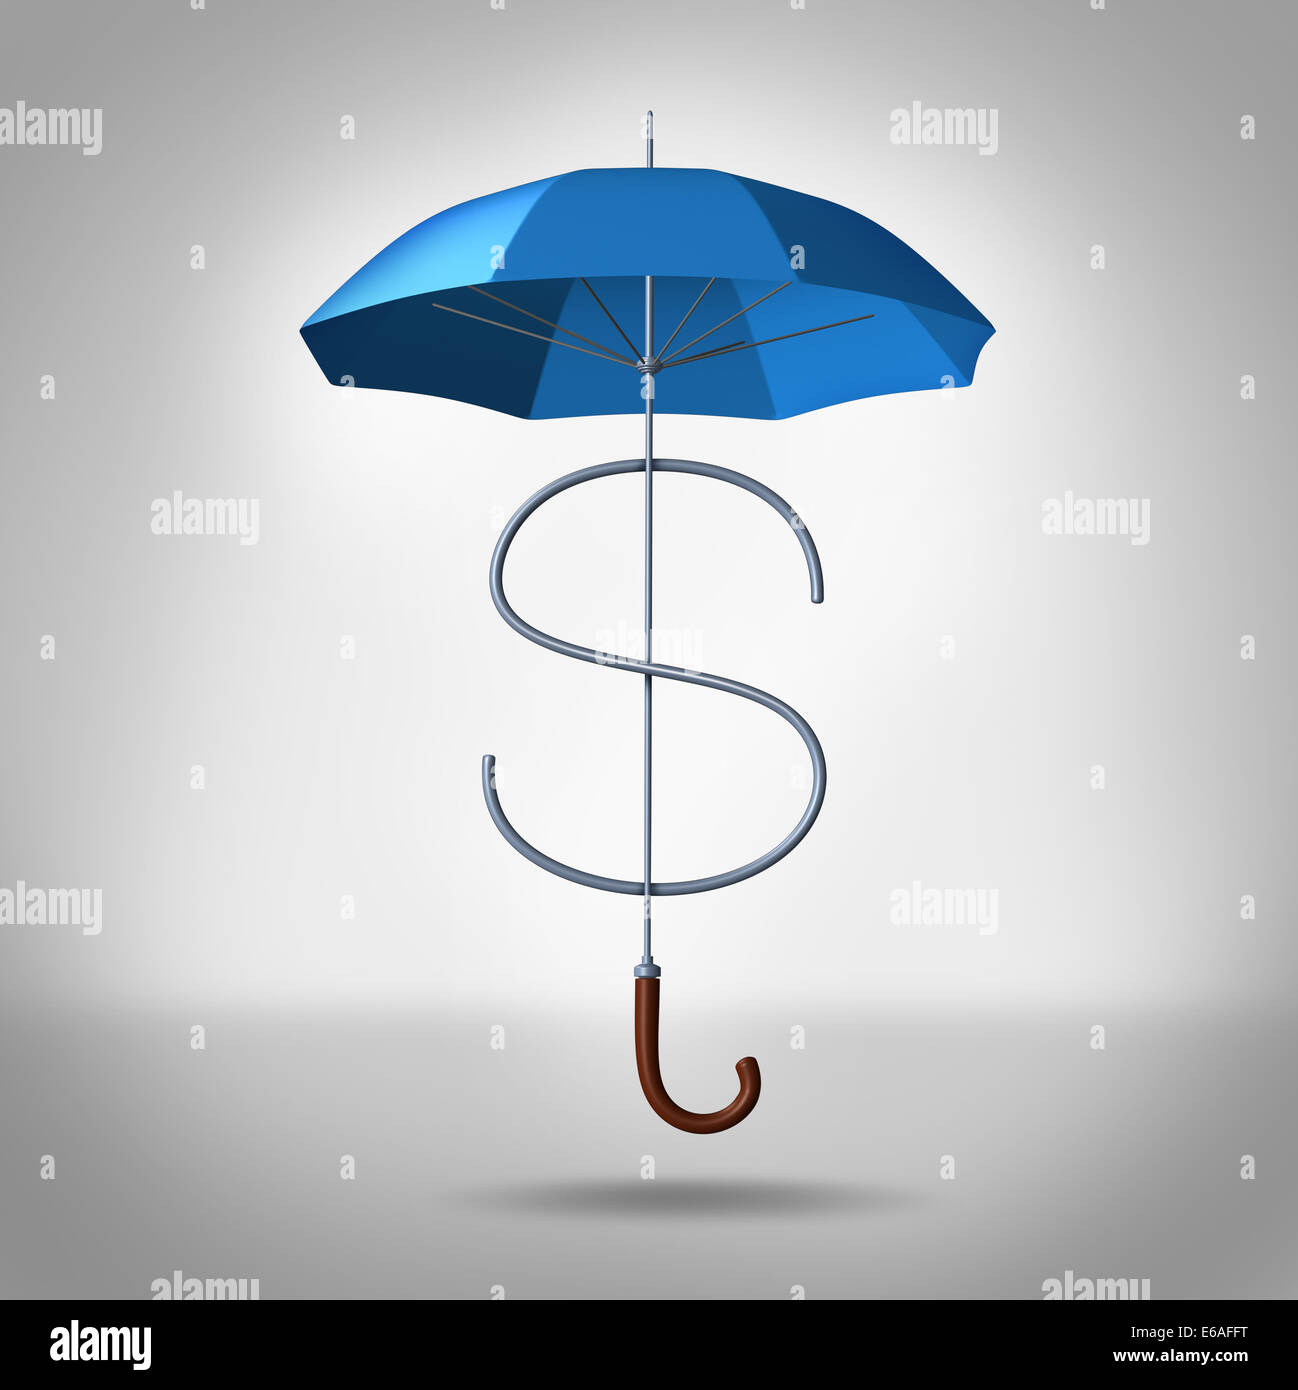 Tax shelter and security costs financial and business concept as a three dimensional umbrella shaped as a dollar symbol as an icon for protection of finance  expenses and shield against fees. Stock Photo